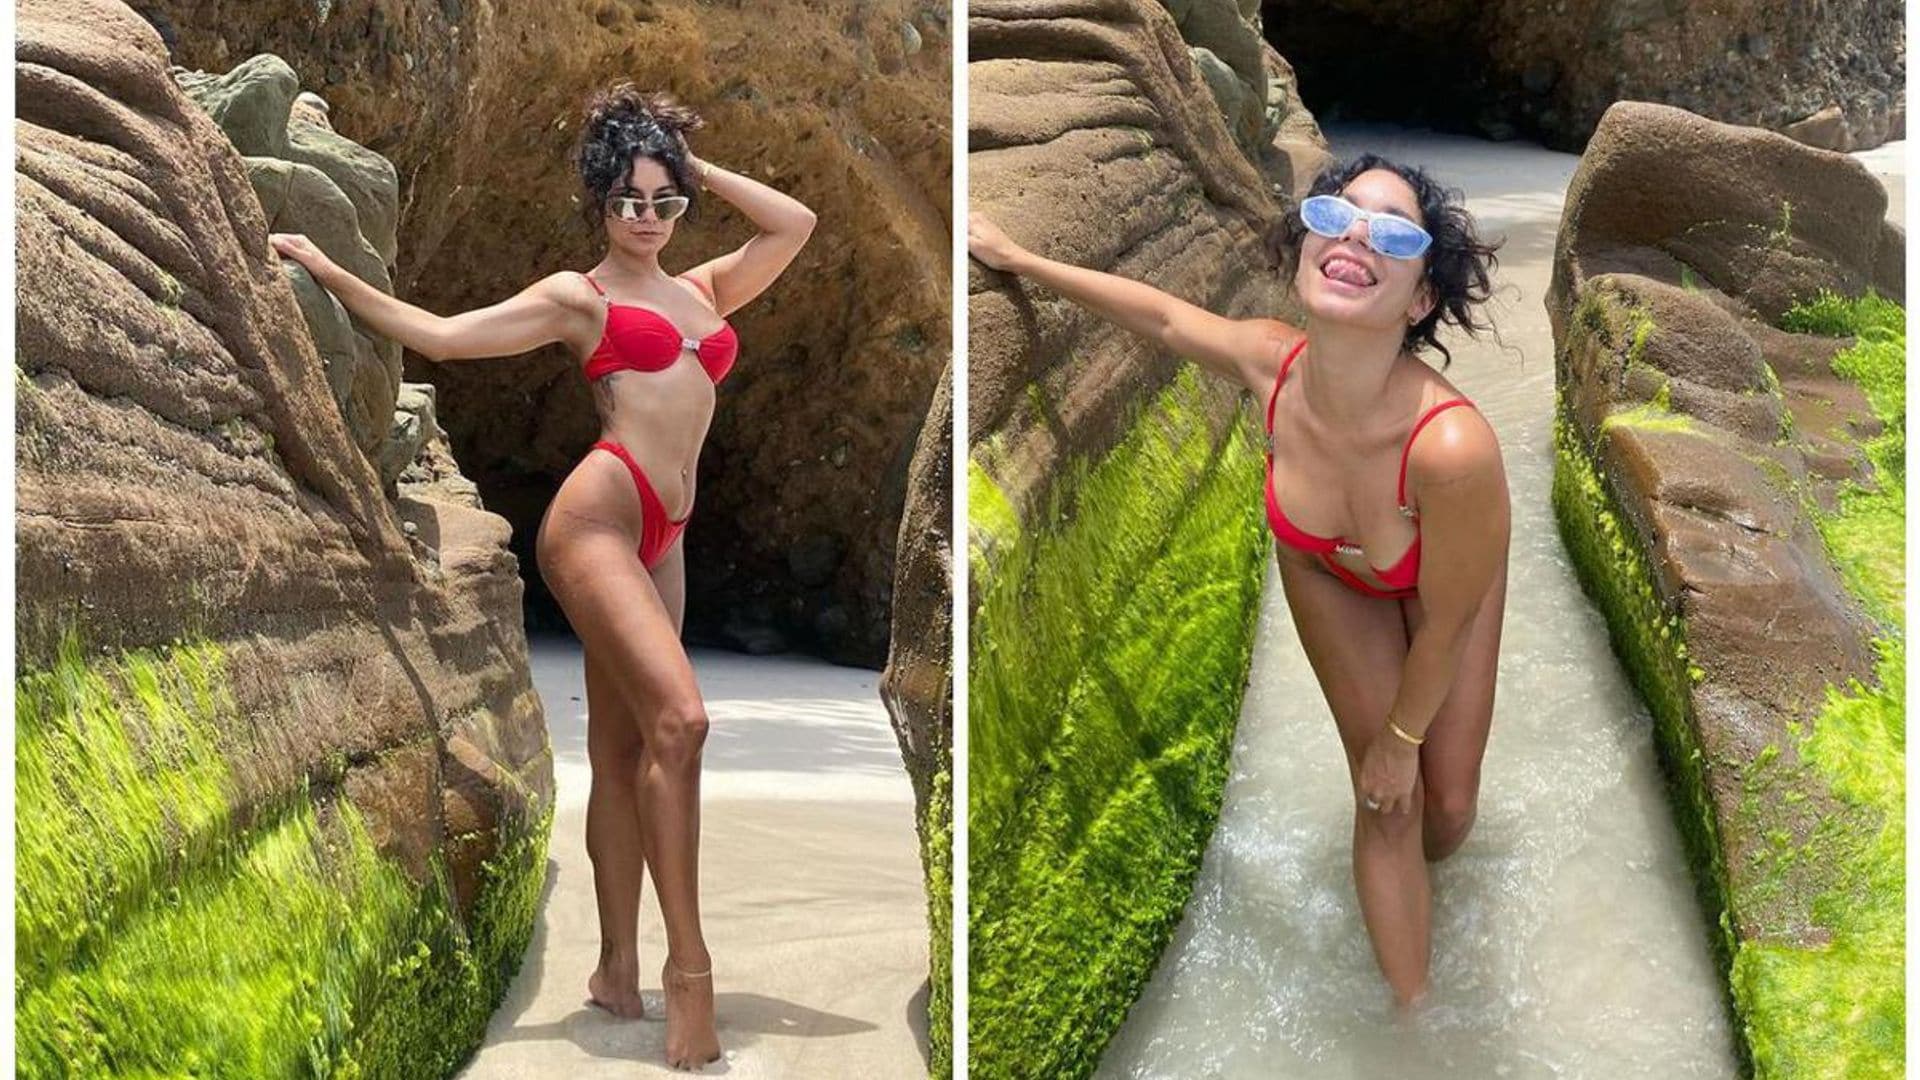 Vanessa Hudgens’ itty bitty red bikini is the gift that keeps on giving